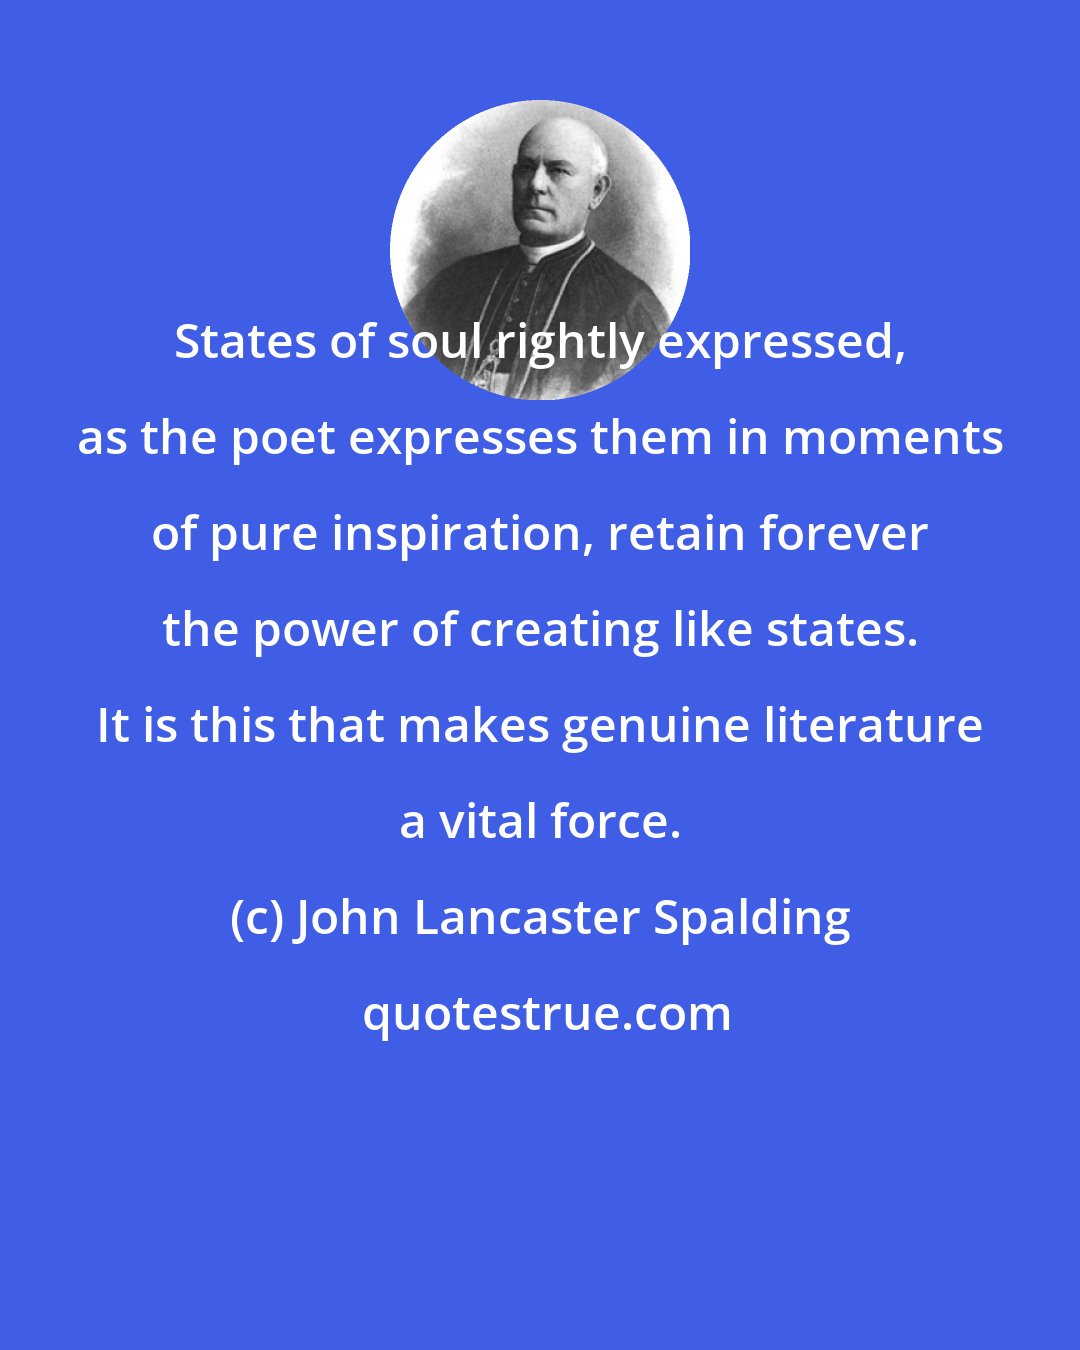 John Lancaster Spalding: States of soul rightly expressed, as the poet expresses them in moments of pure inspiration, retain forever the power of creating like states. It is this that makes genuine literature a vital force.